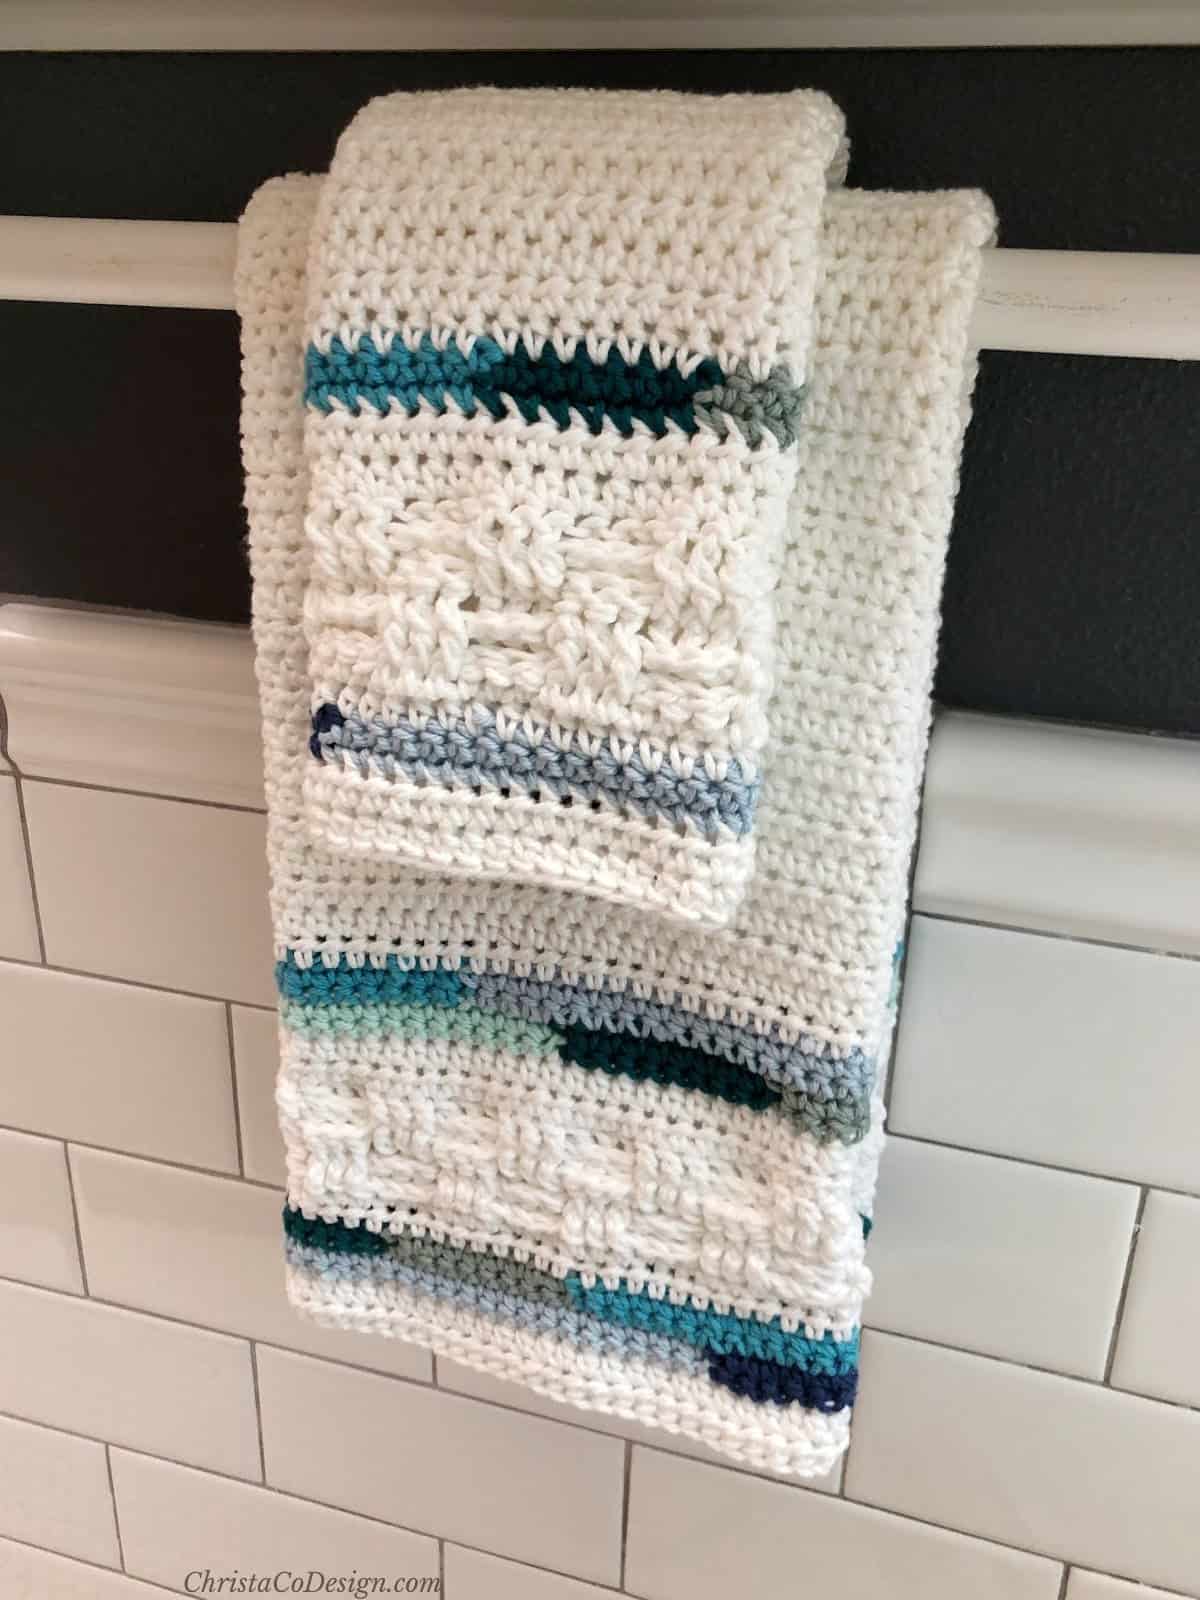 Crochet hand towel and washcloth in white with blue stripes hanging from towel bar over white subway tiles.